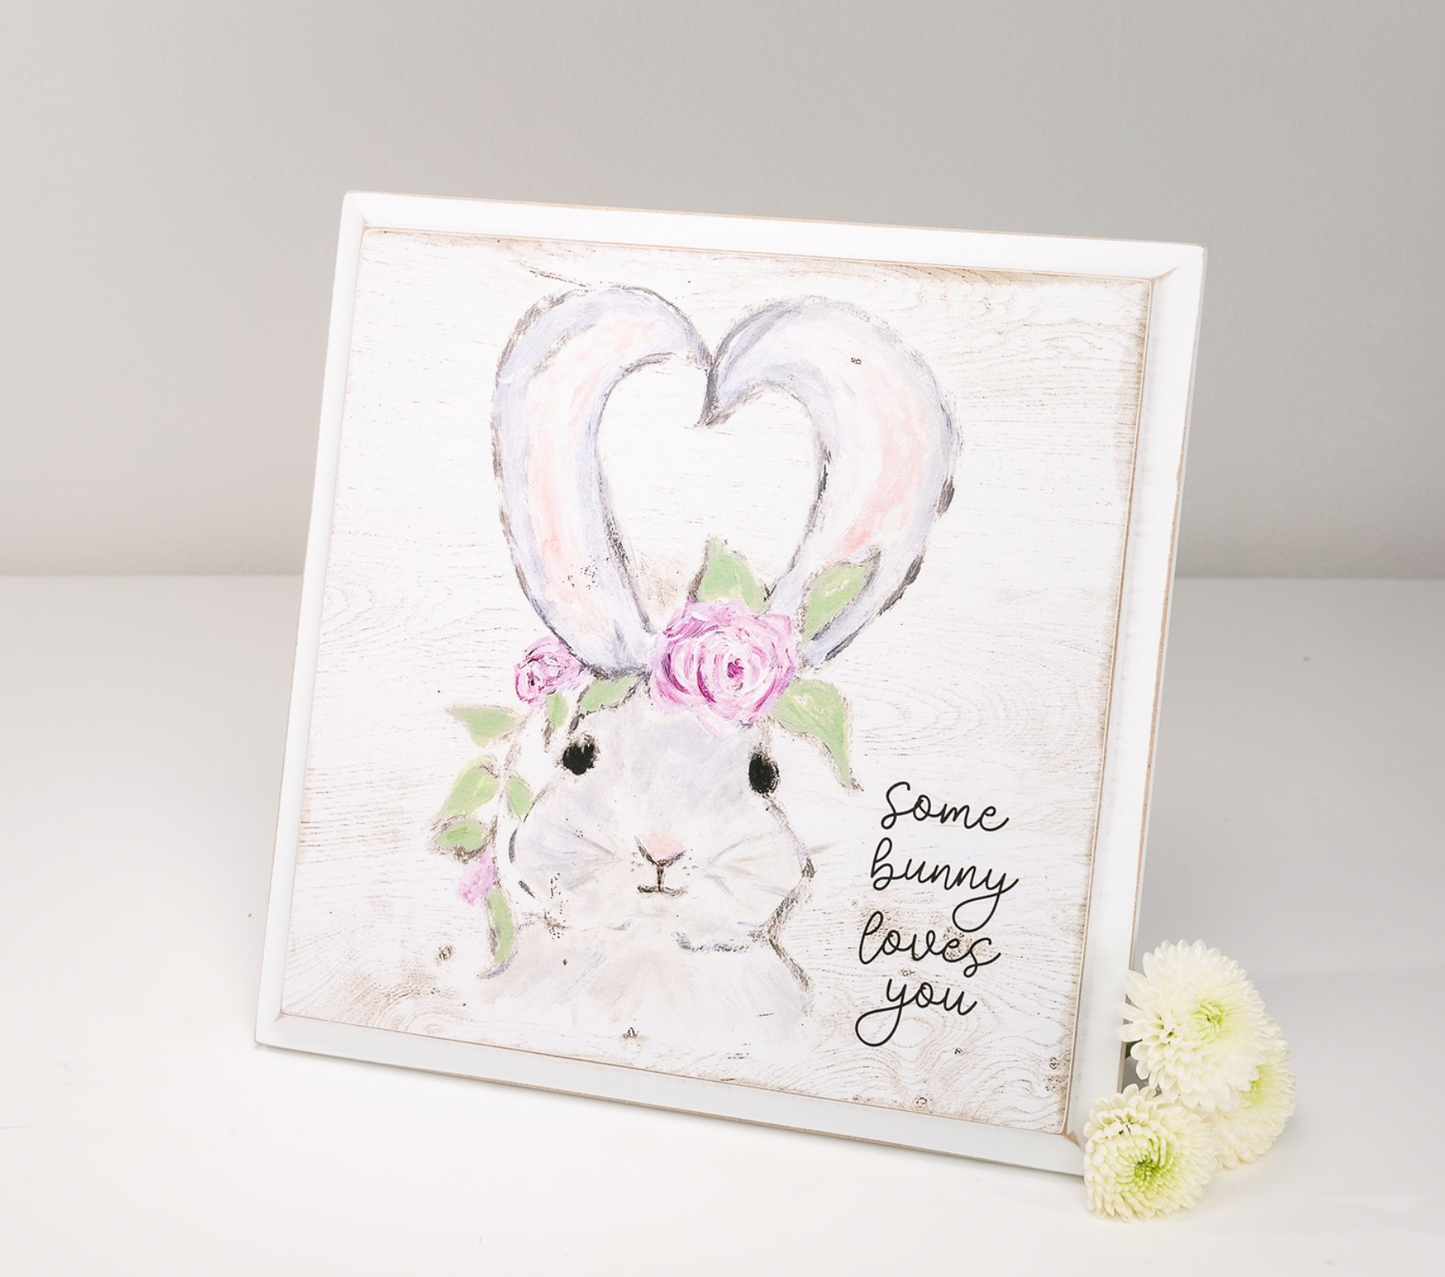 SOMEBUNNY LOVES YOU TABLE SIGN